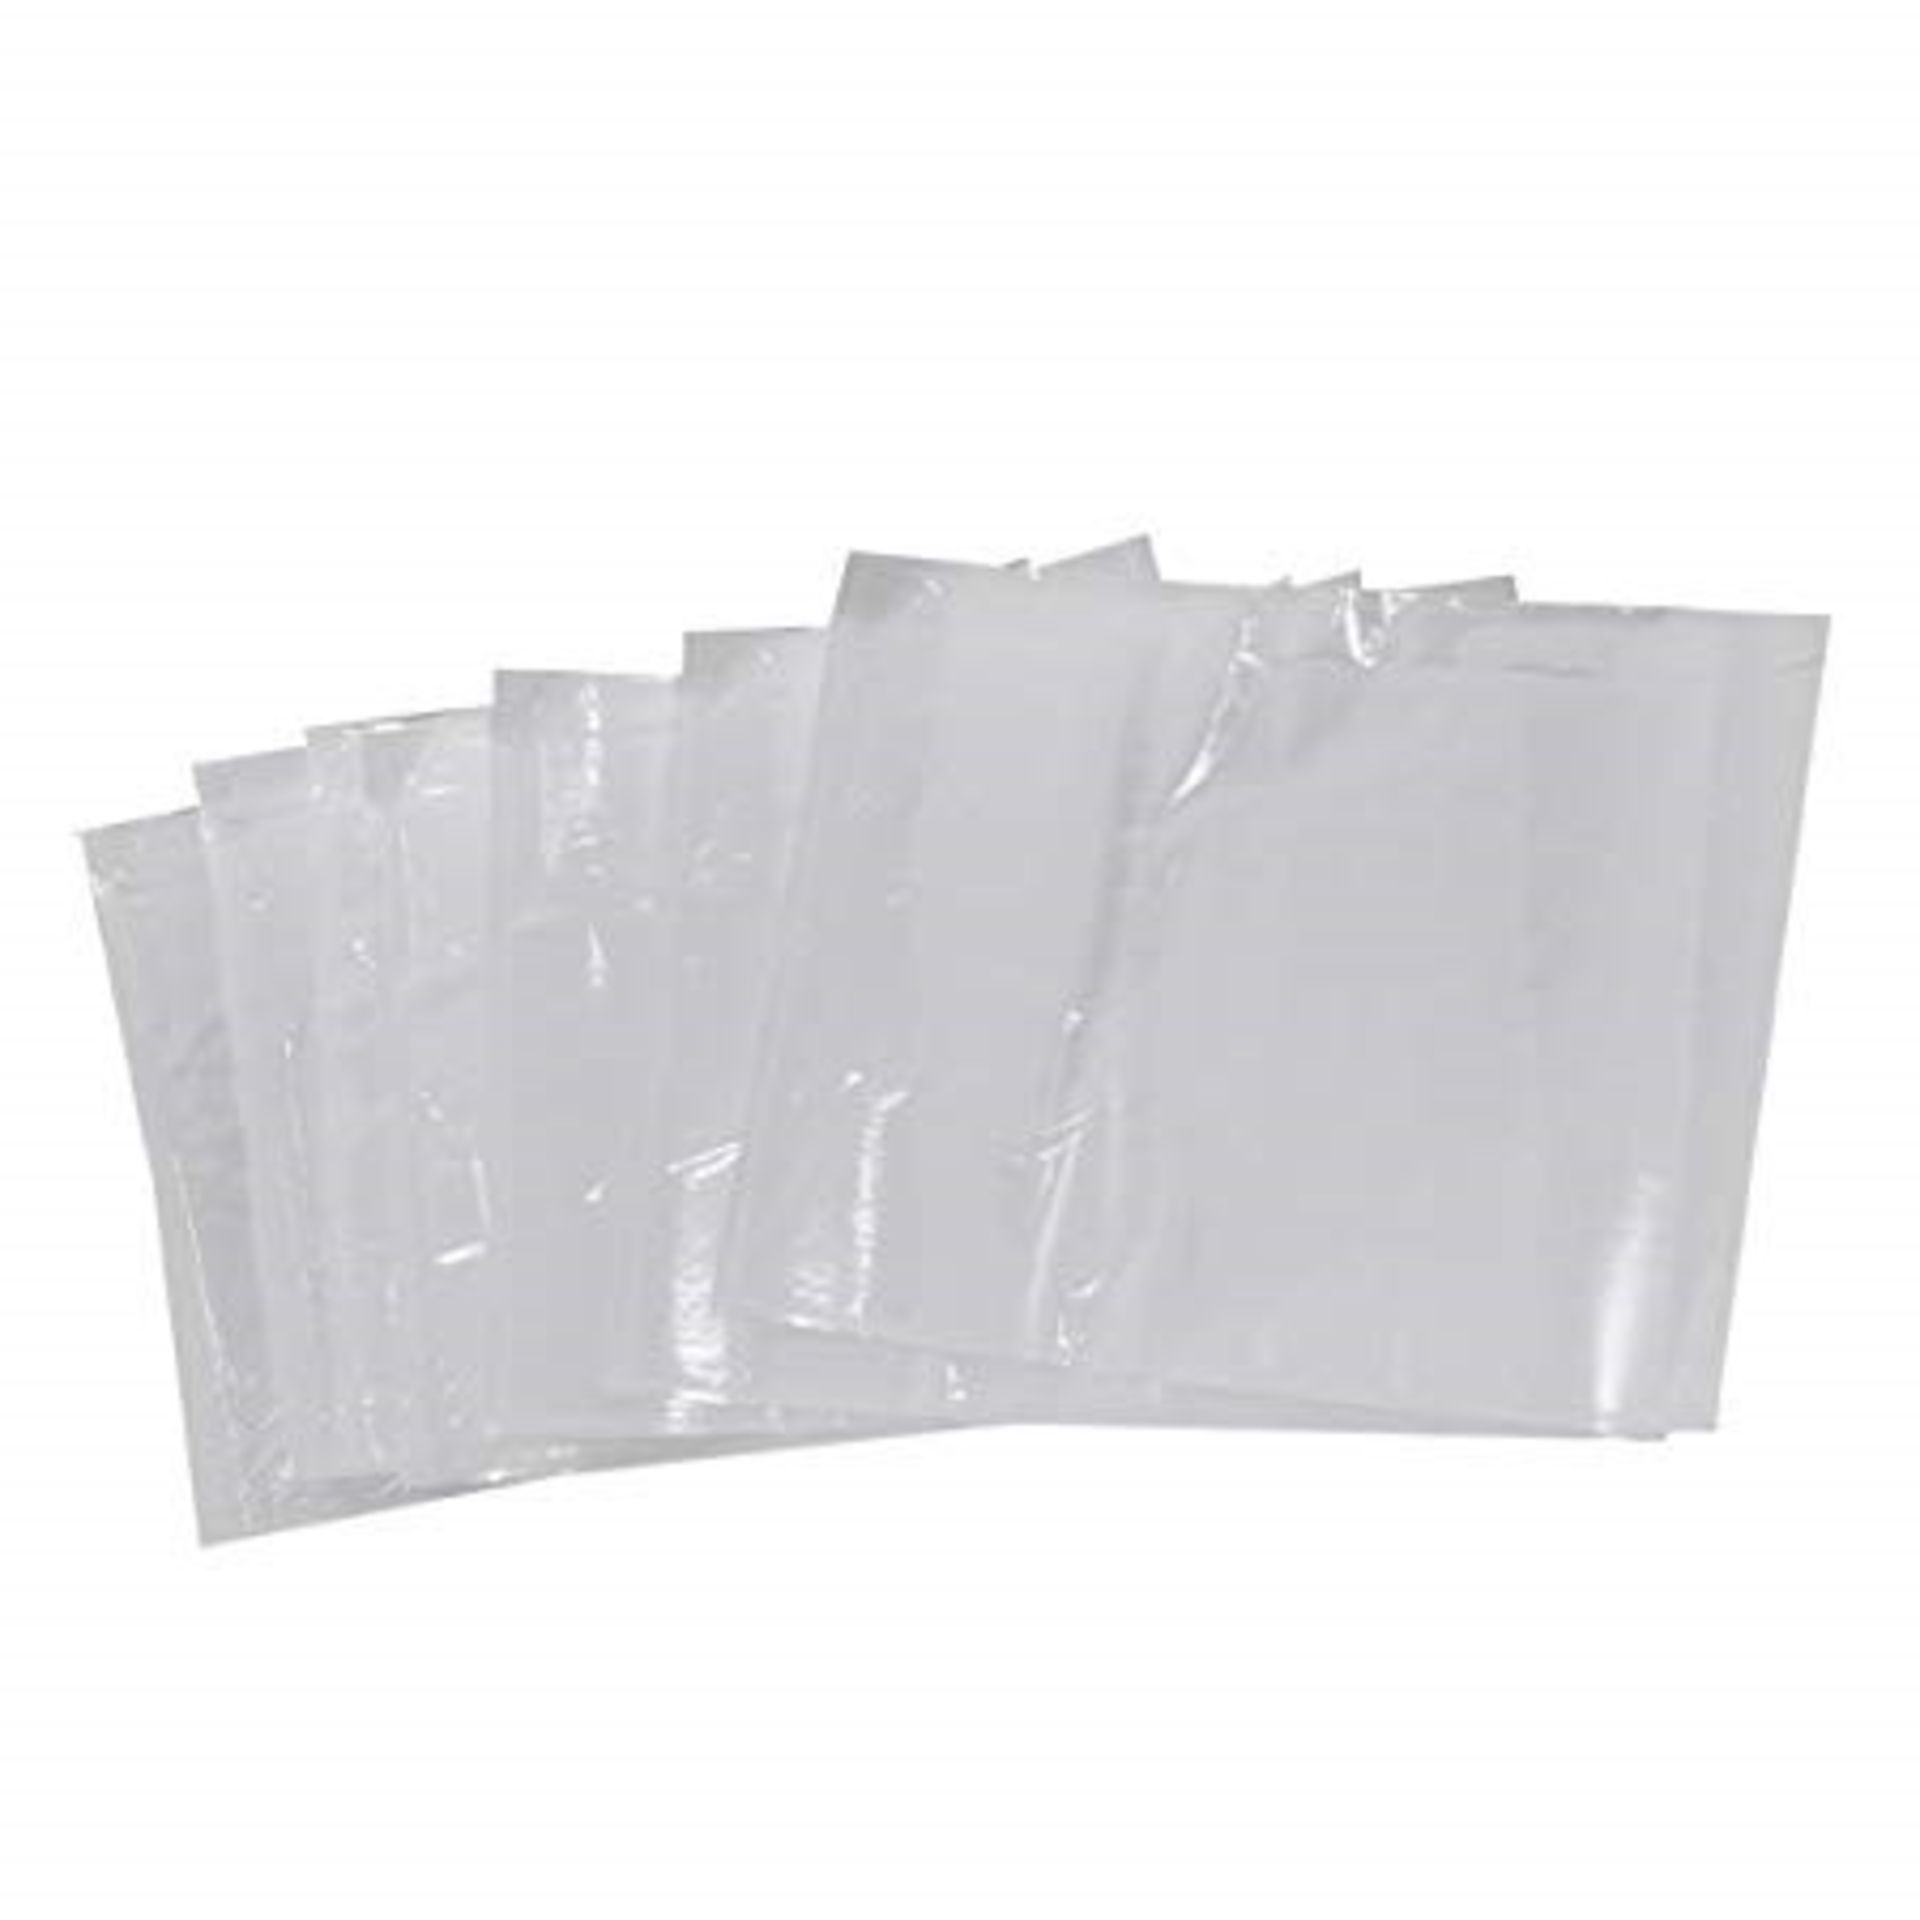 1 BOX OF 1000 PLAIN A5 DOCUMENT ENVELOPES / PN - 319 / RRP £31.69 (VIEWING HIGHLY RECOMMENDED)